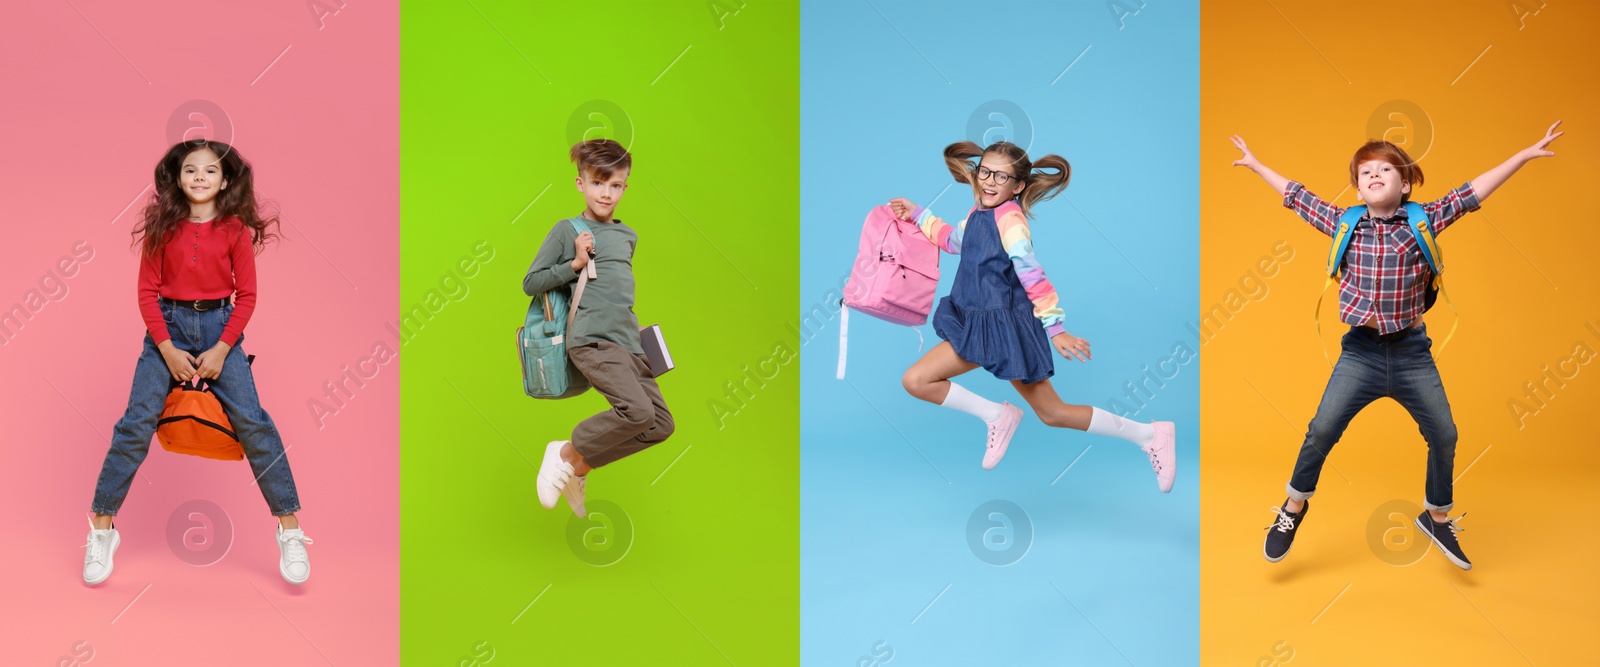 Image of Schoolchildren jumping on color backgrounds, set of photos